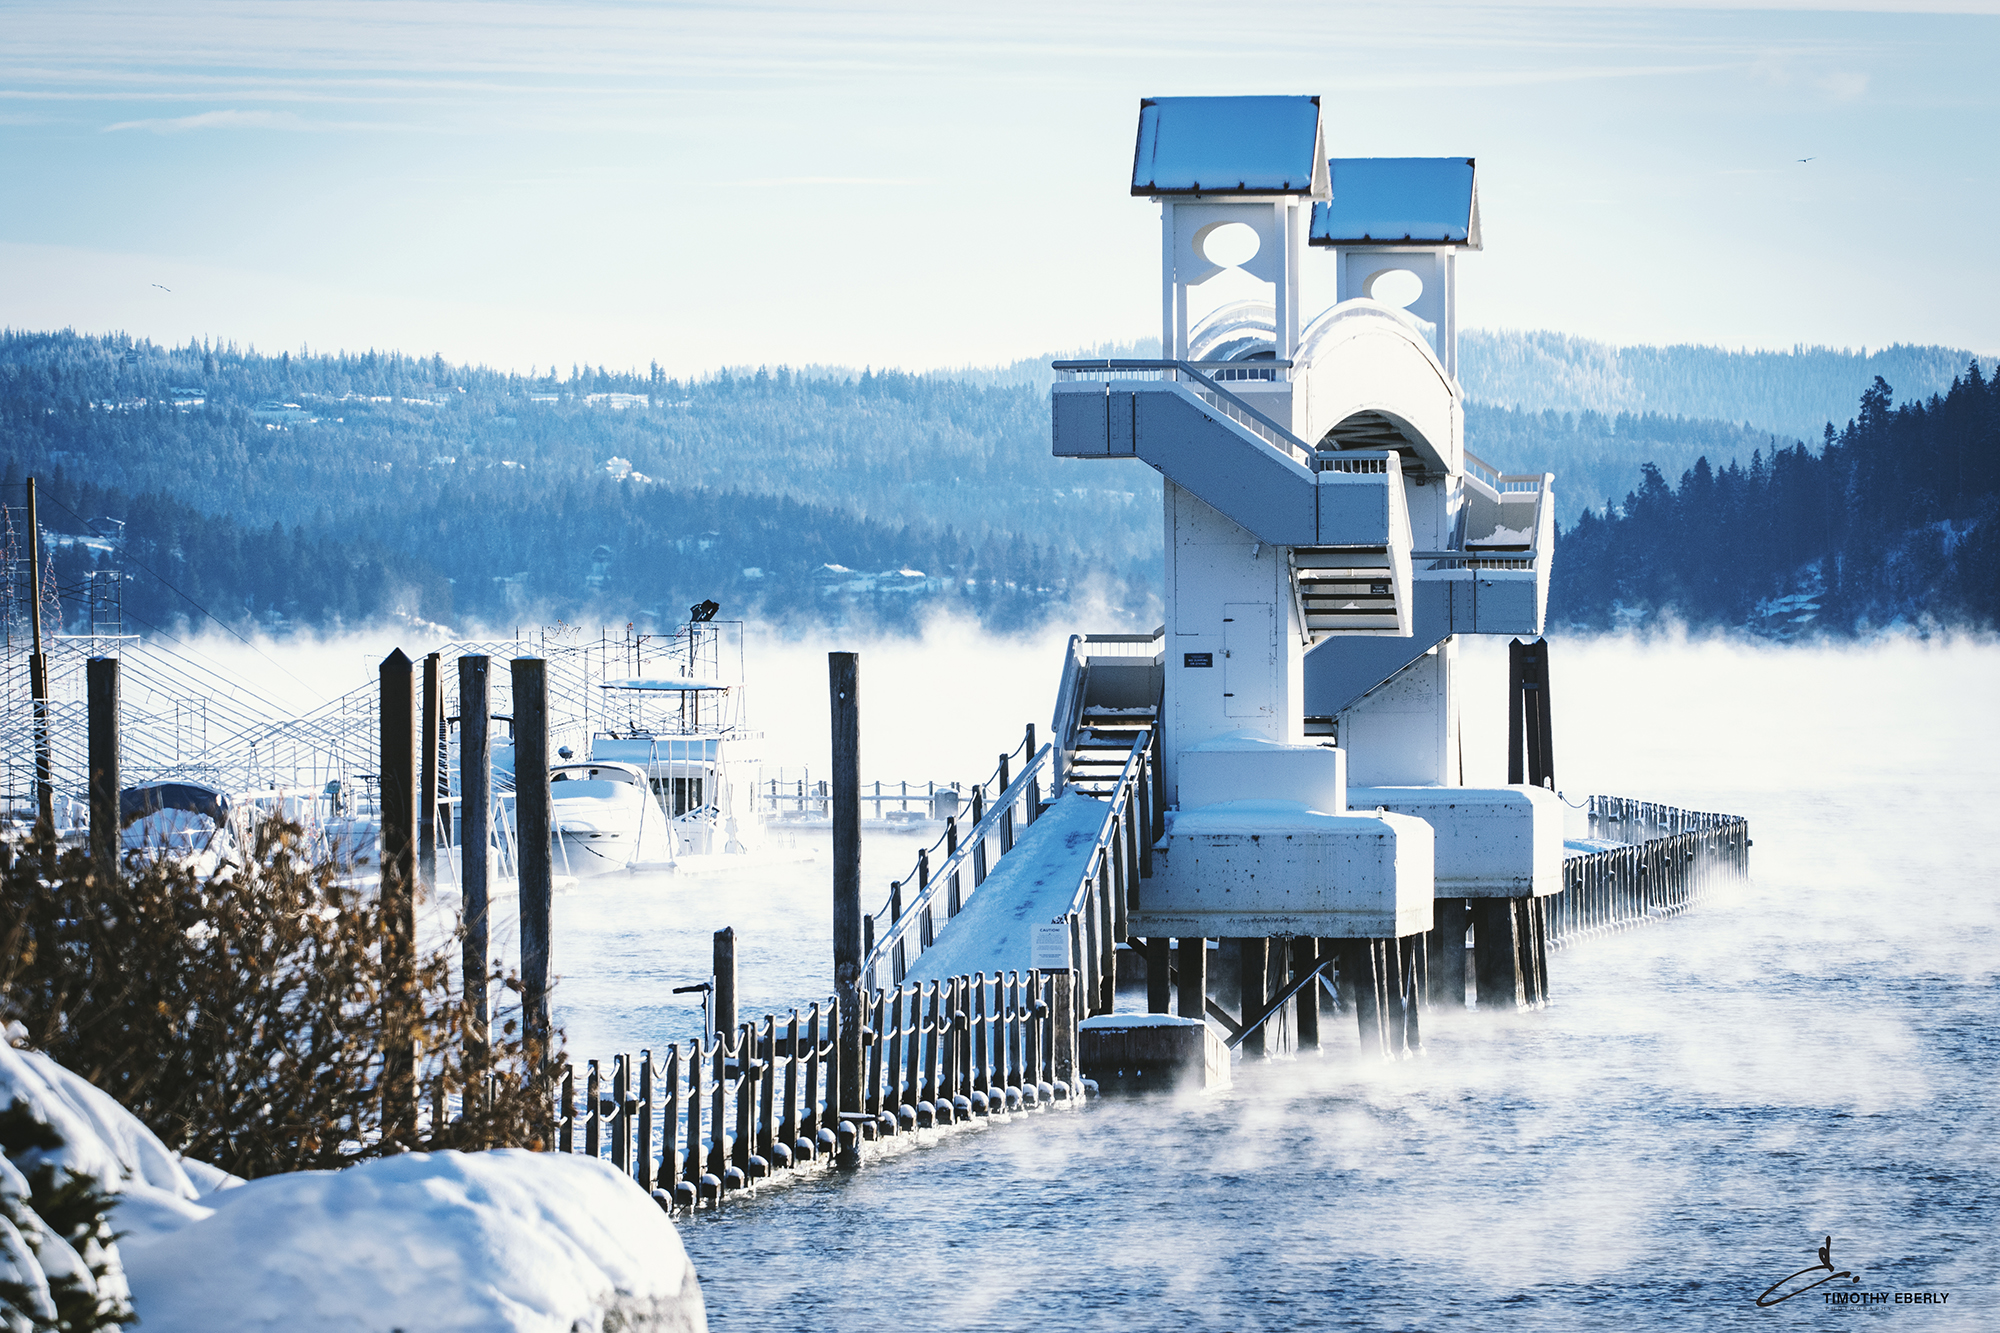 Coeur d'Alene lake steaming in the cold temperatures